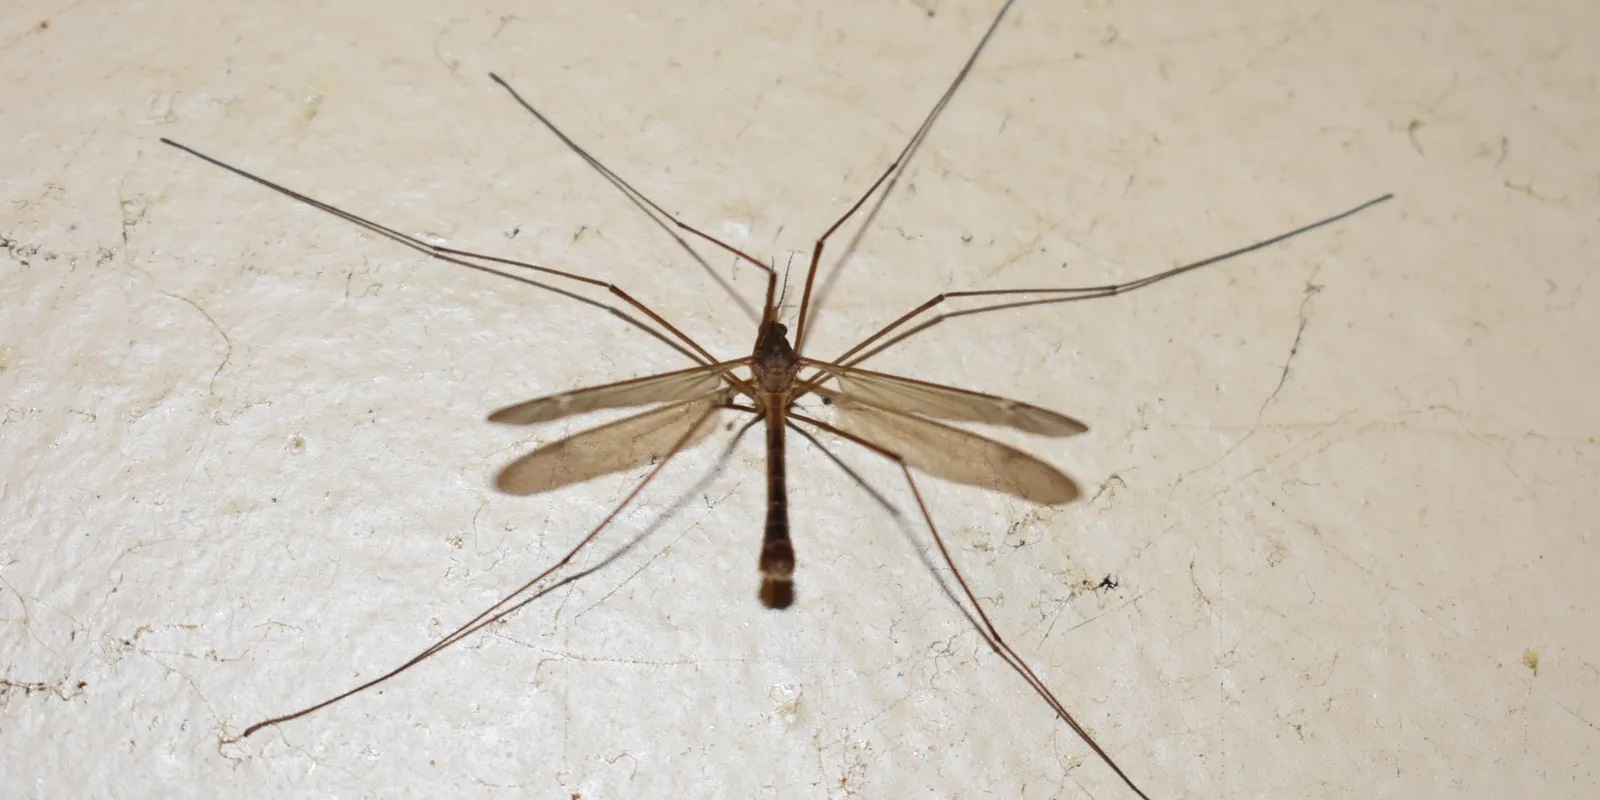 How to Get Rid Of Crane Flies Naturally